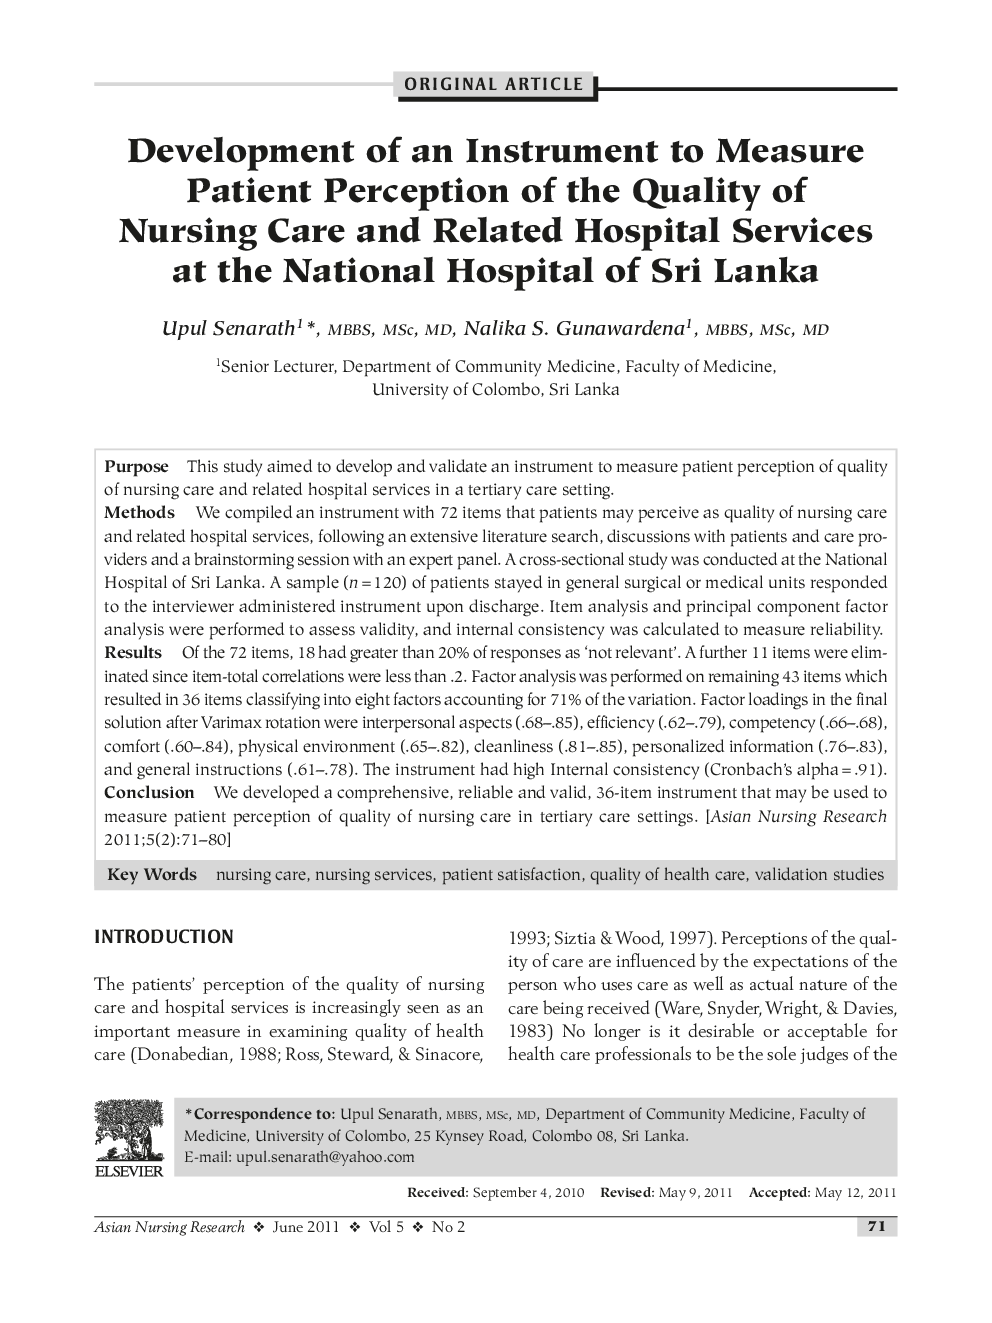 Development of an Instrument to Measure Patient Perception of the Quality of Nursing Care and Related Hospital Services at the National Hospital of Sri Lanka